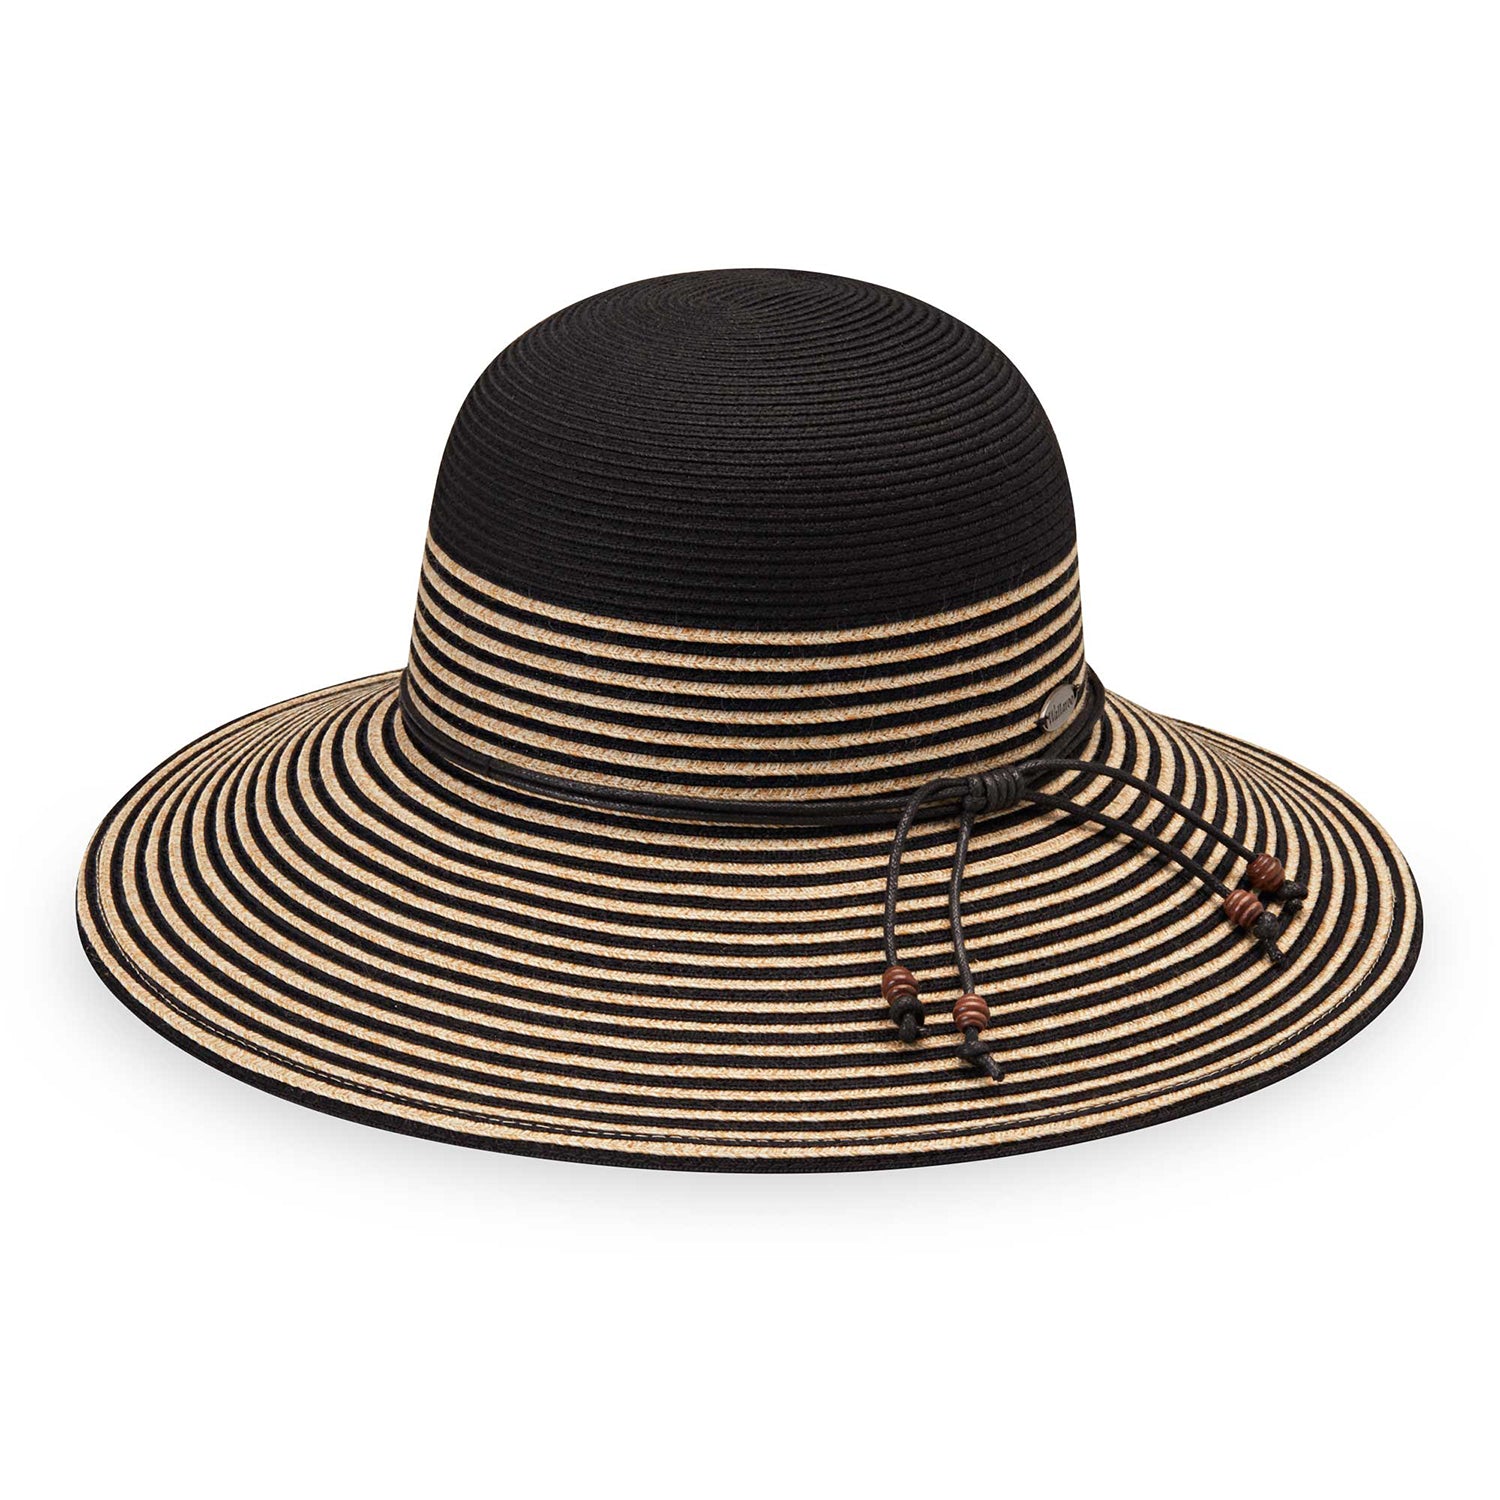 Featuring Women's petite marseille sun hat by Wallaroo, featuring a UPF 50+ rating and big wide brim